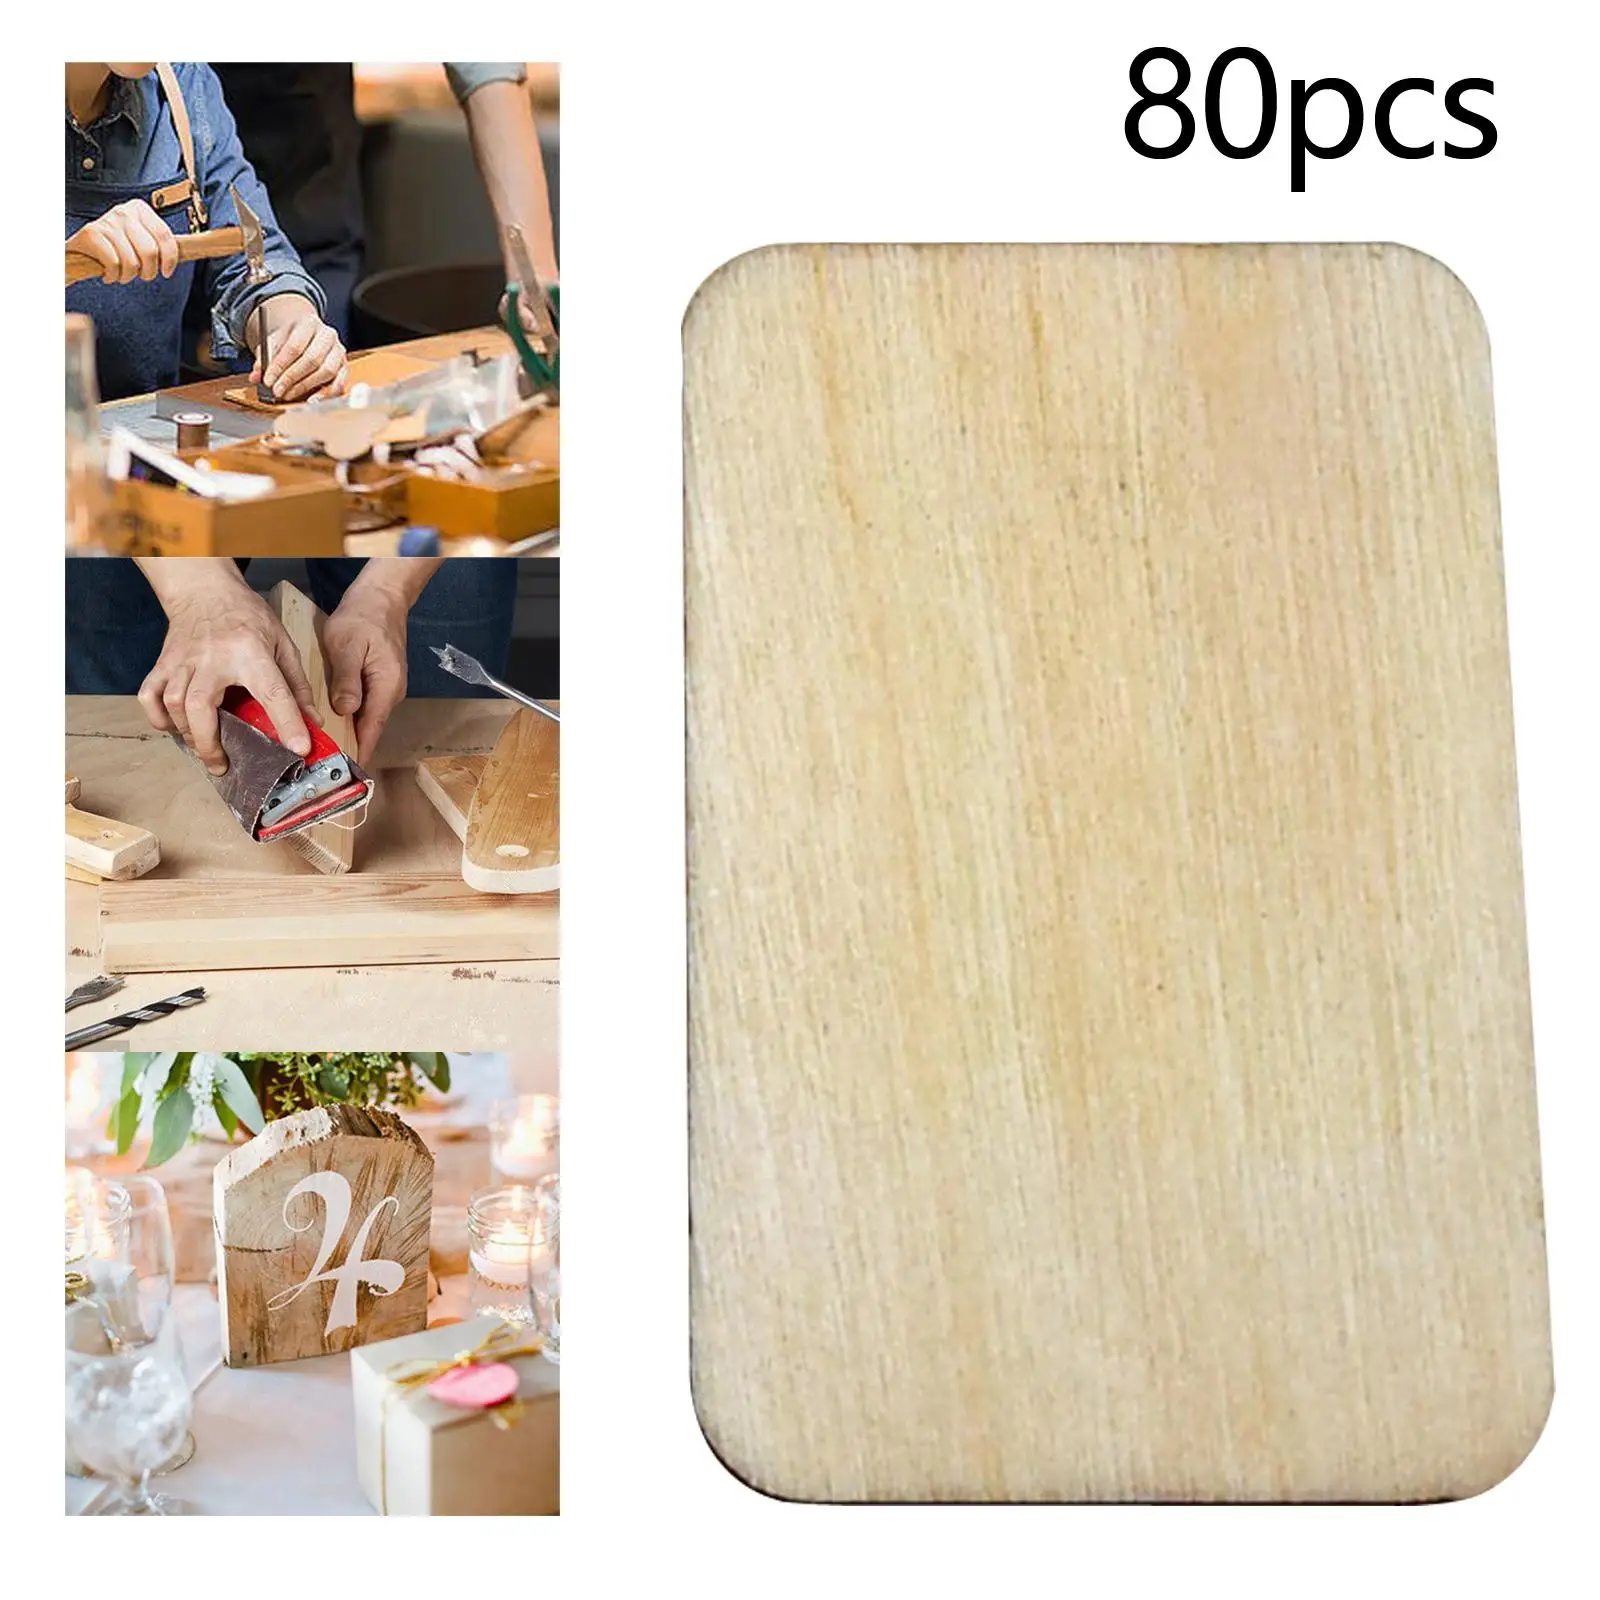 80Pcs Natural Unfinished Wood Pieces Blank Wood Slices Cutouts Disc for DIY Crafts Sign Table Centerpieces Art Craft Project